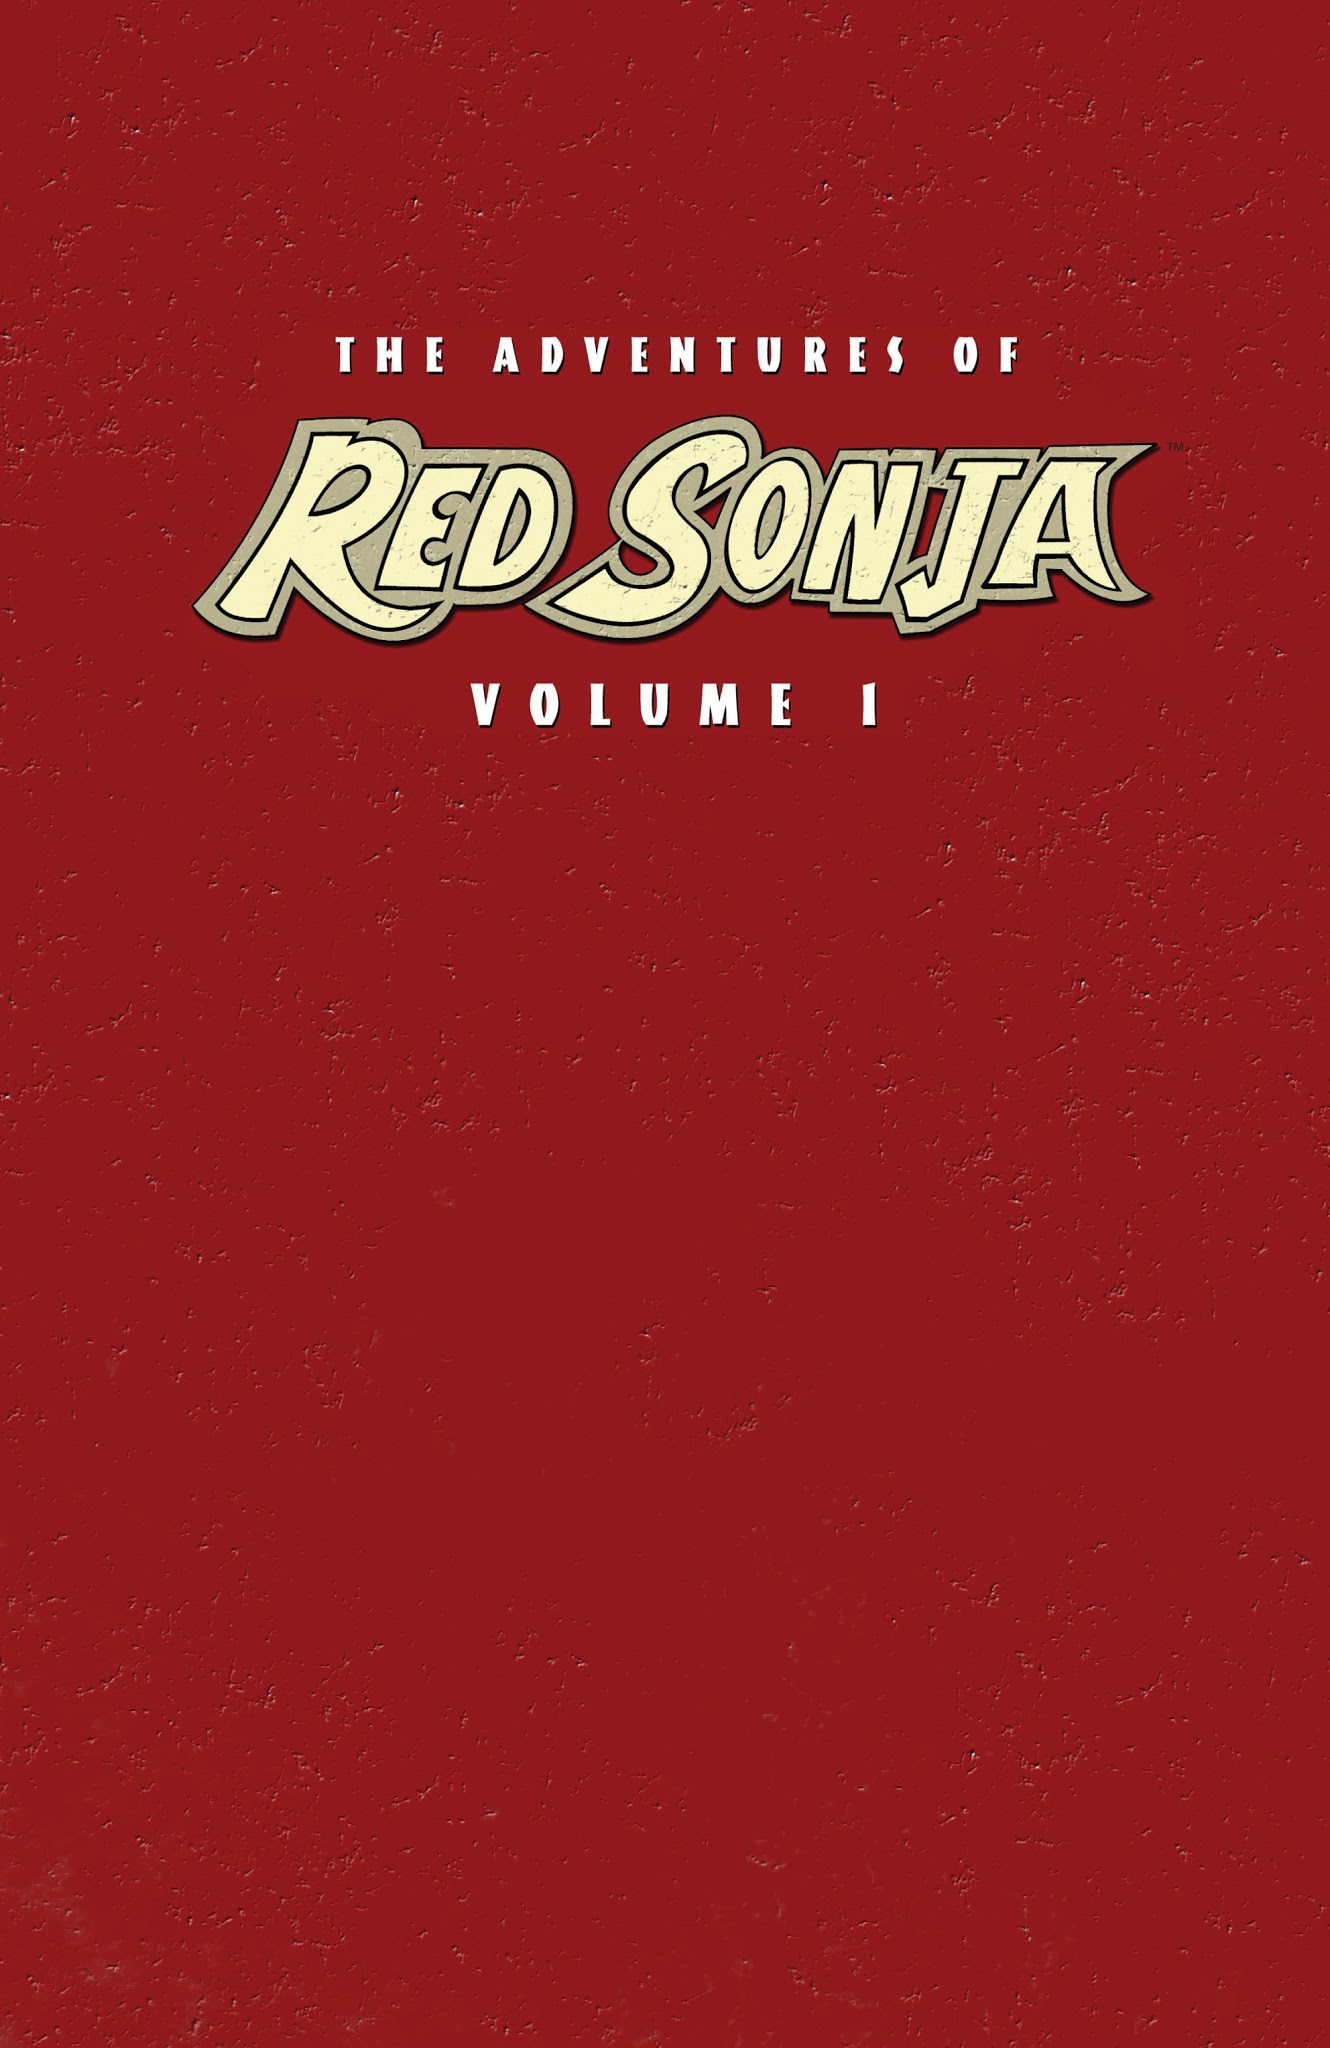 Read online The Adventures of Red Sonja comic -  Issue # TPB 1 - 3